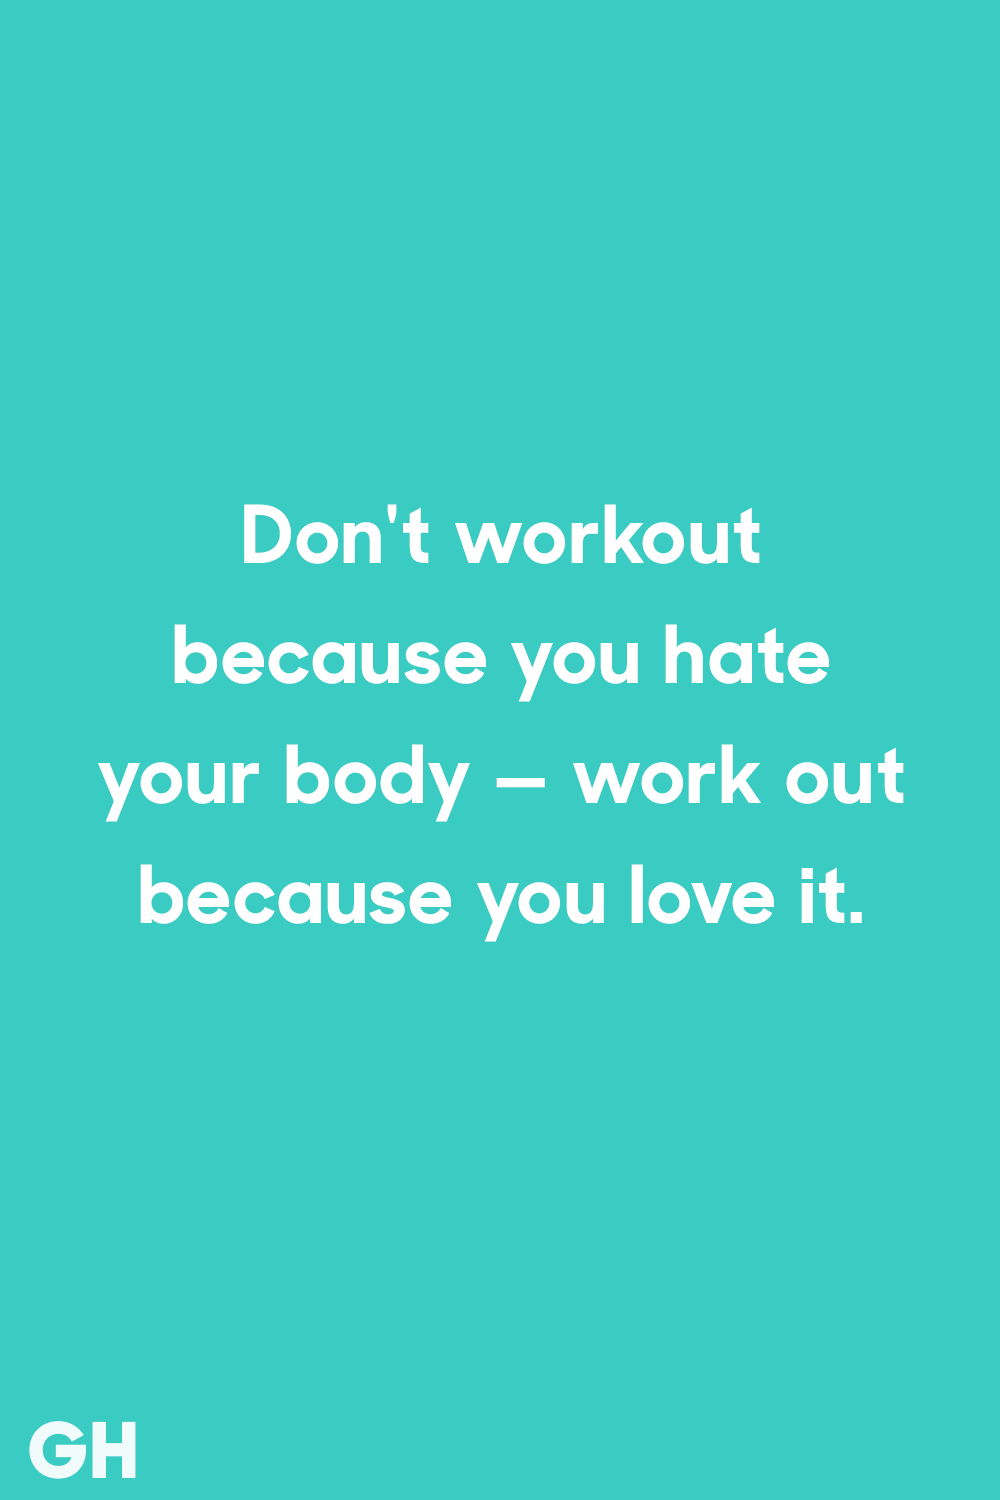 dating advice quotes for women without workout